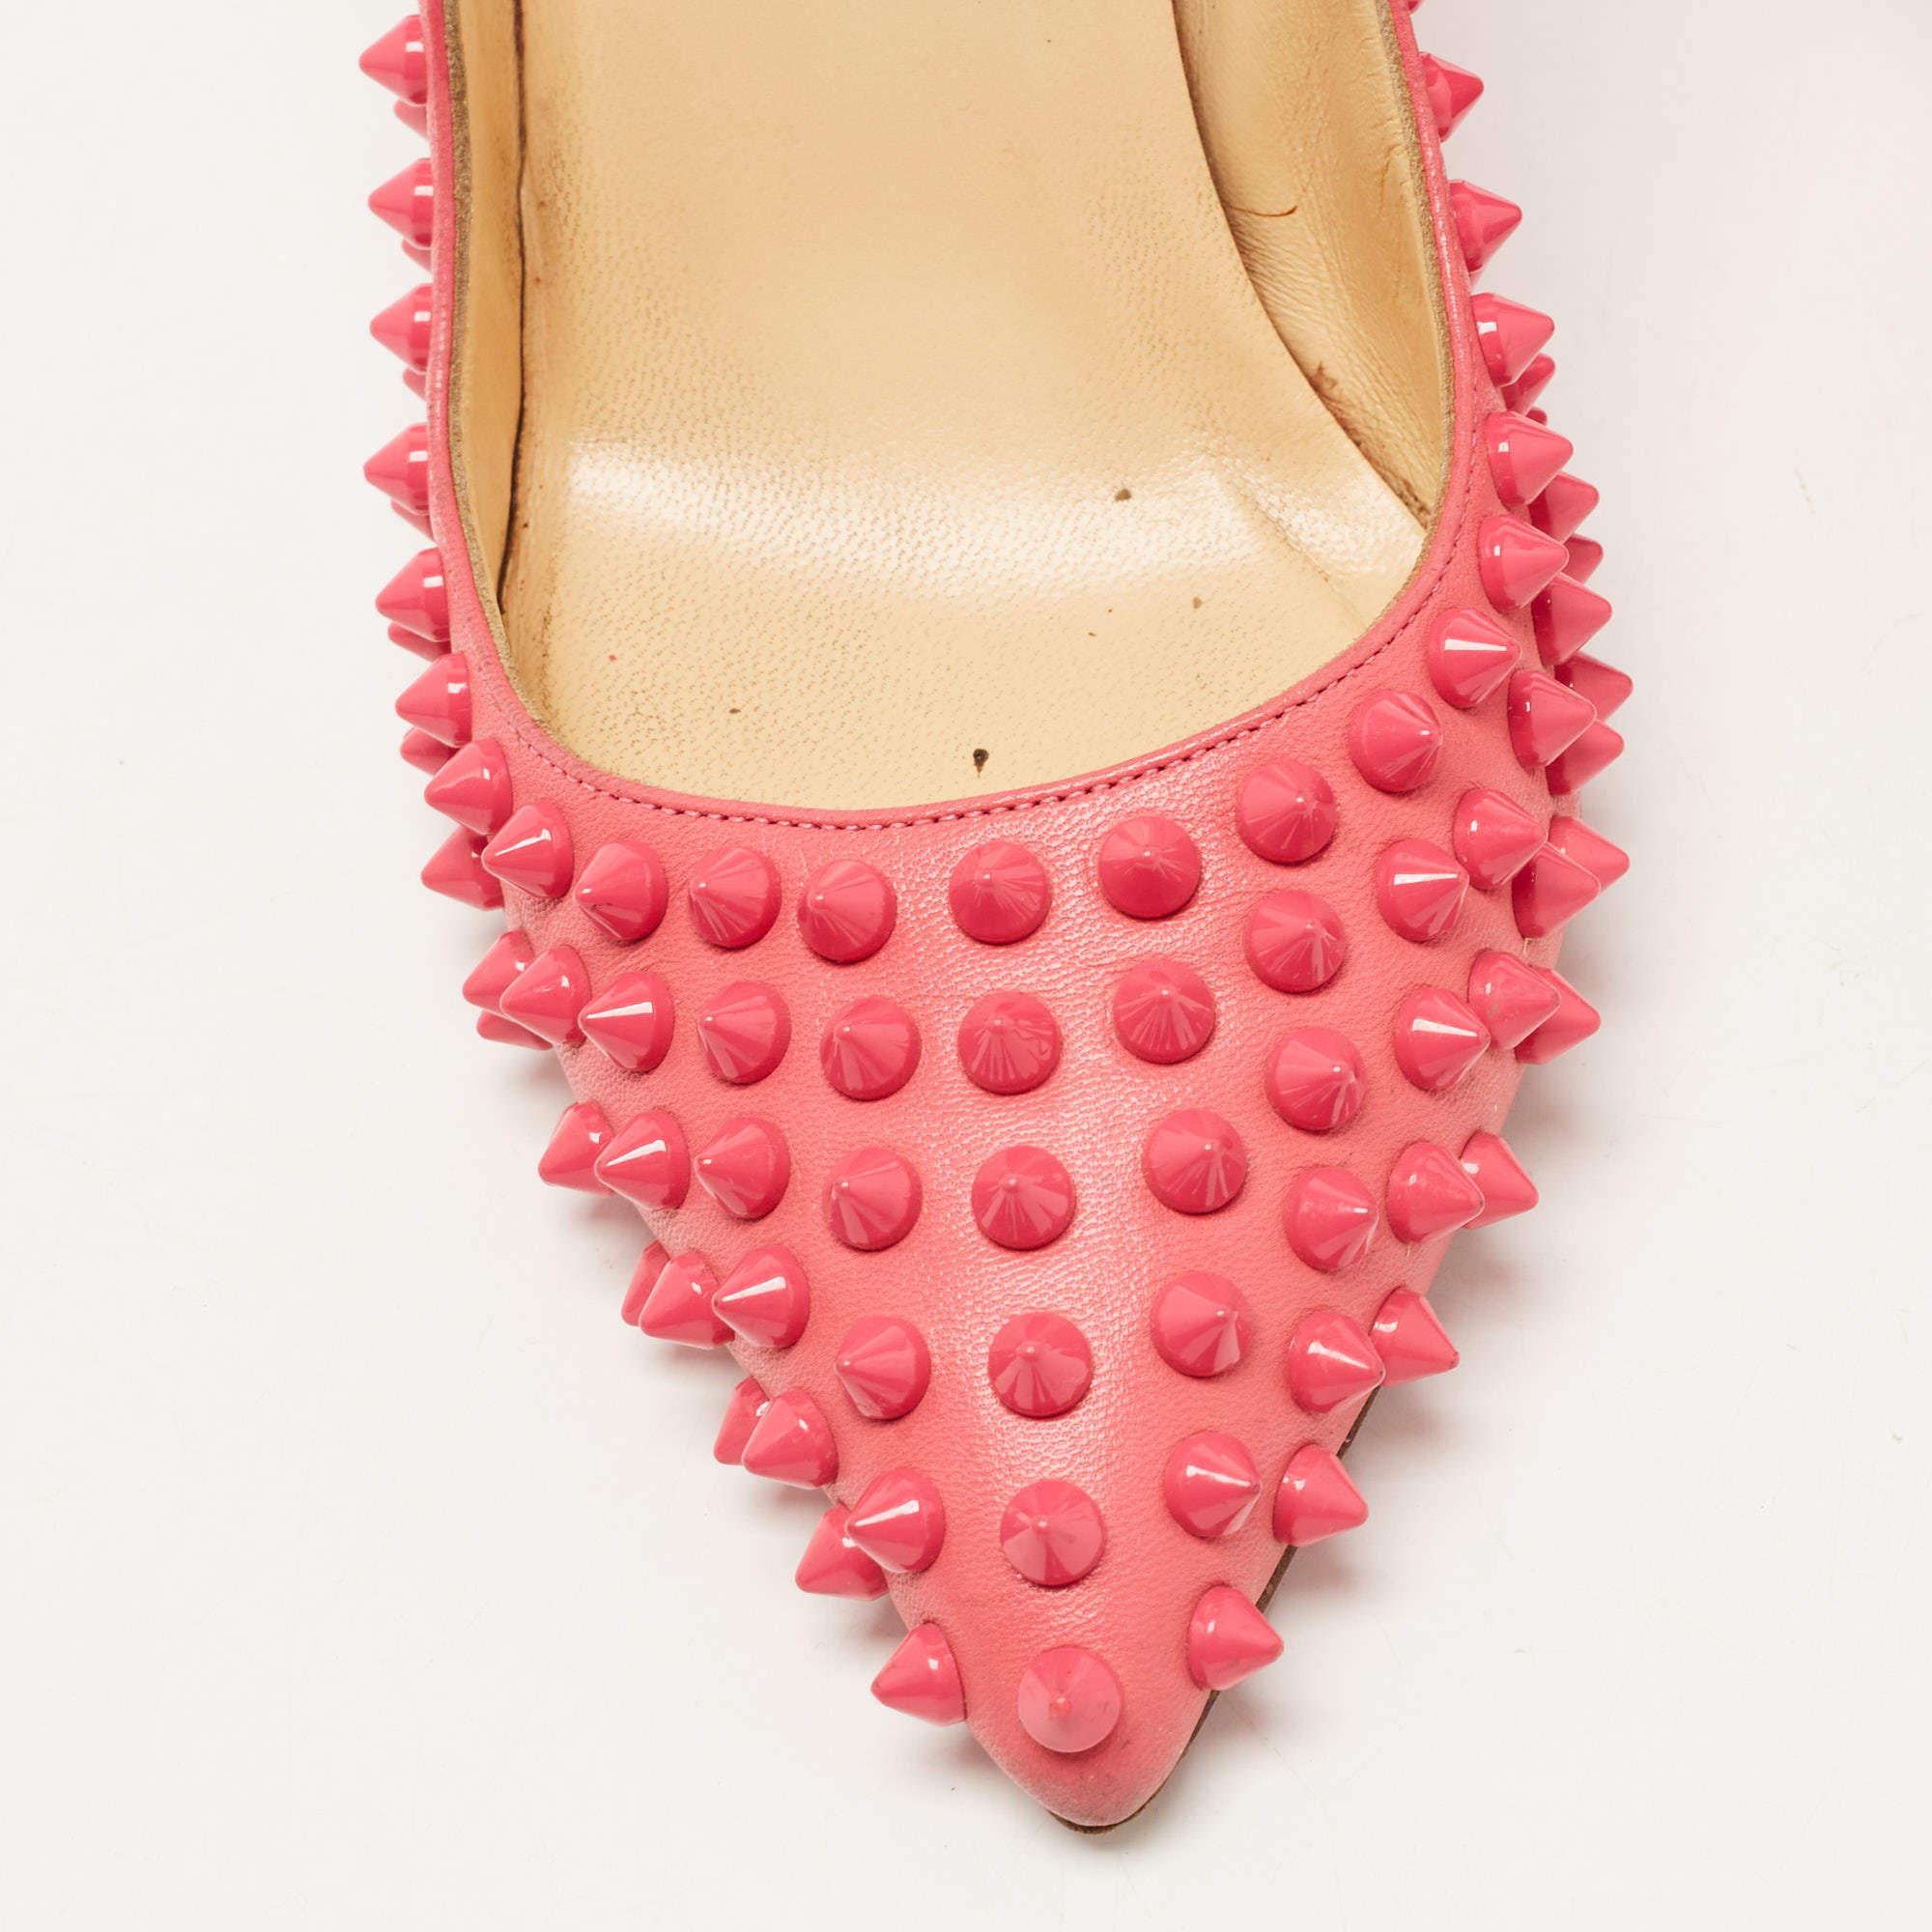 Christian Louboutin Pink Leather Pigalle Spikes Pumps Size 37 4